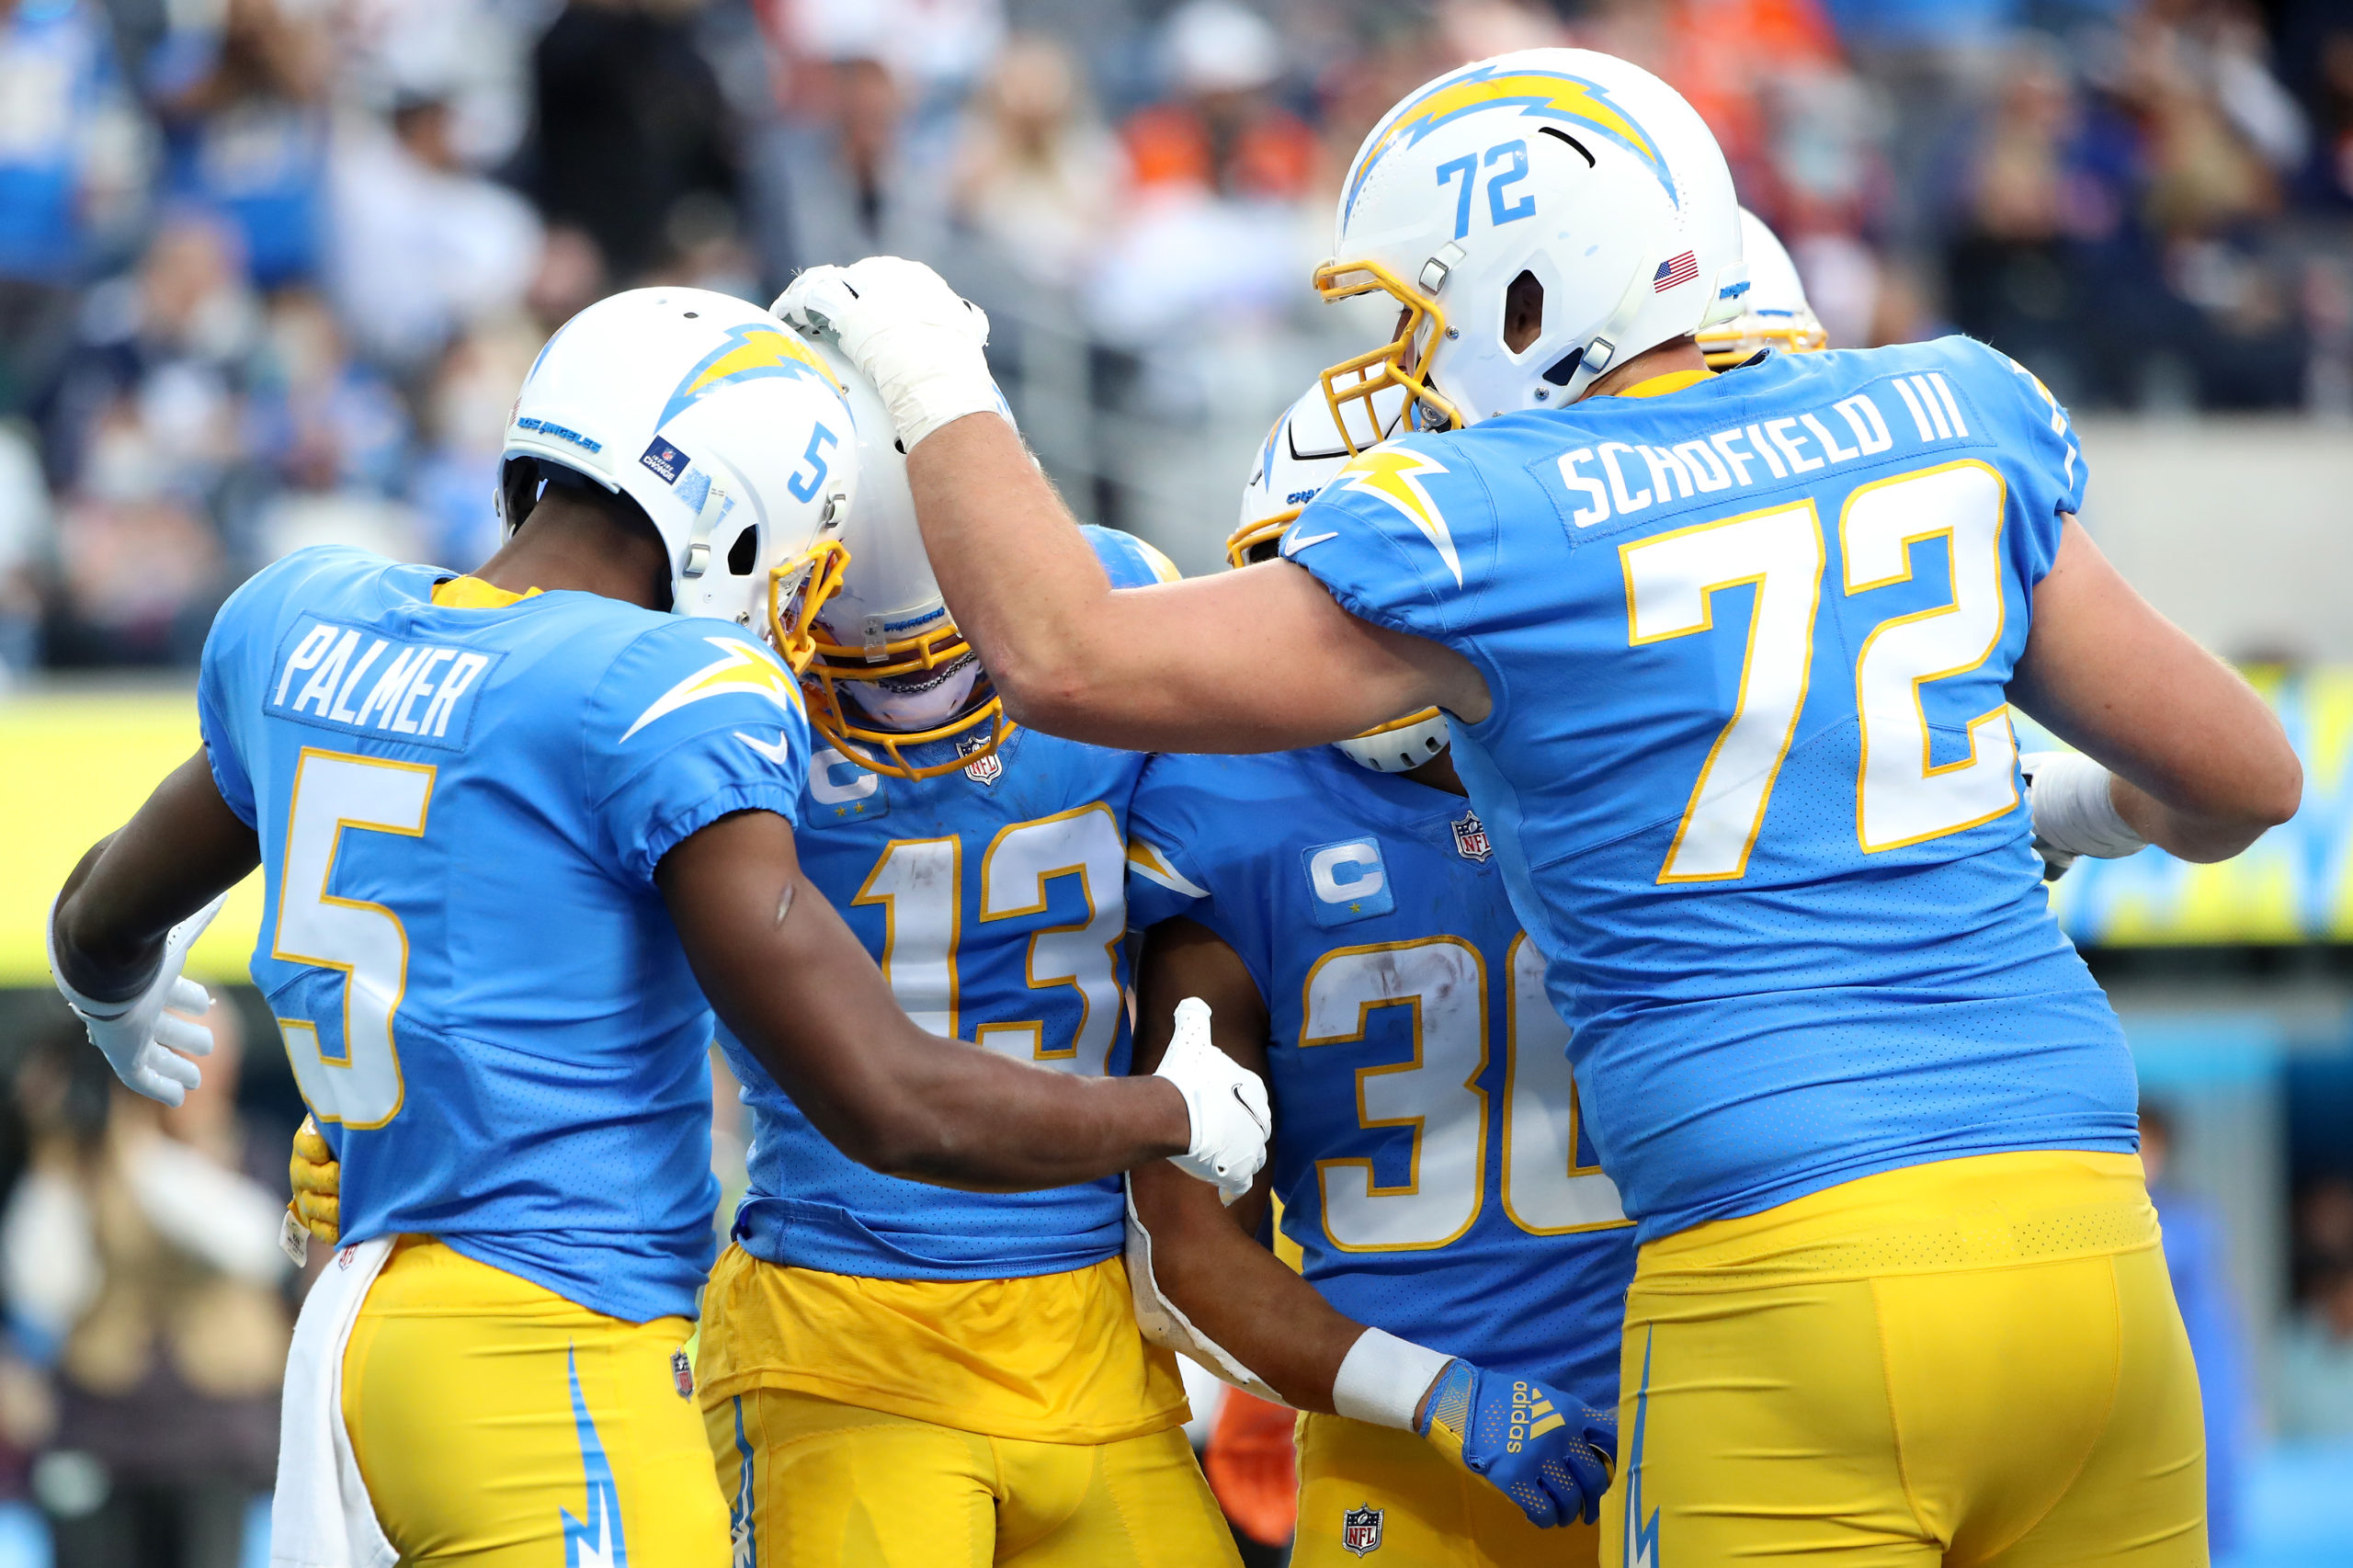 INGLEWOOD, CALIFORNIA - JANUARY 02: Keenan Allen #13 of the Los Angeles Chargers celebrates his touchdown with teammates Josh Palmer #5, Austin Ekeler #30 and Michael Schofield #72 during the second quarter against the Denver Broncos at SoFi Stadium on January 02, 2022 in Inglewood, California. (Photo by Katelyn Mulcahy/Getty Images)